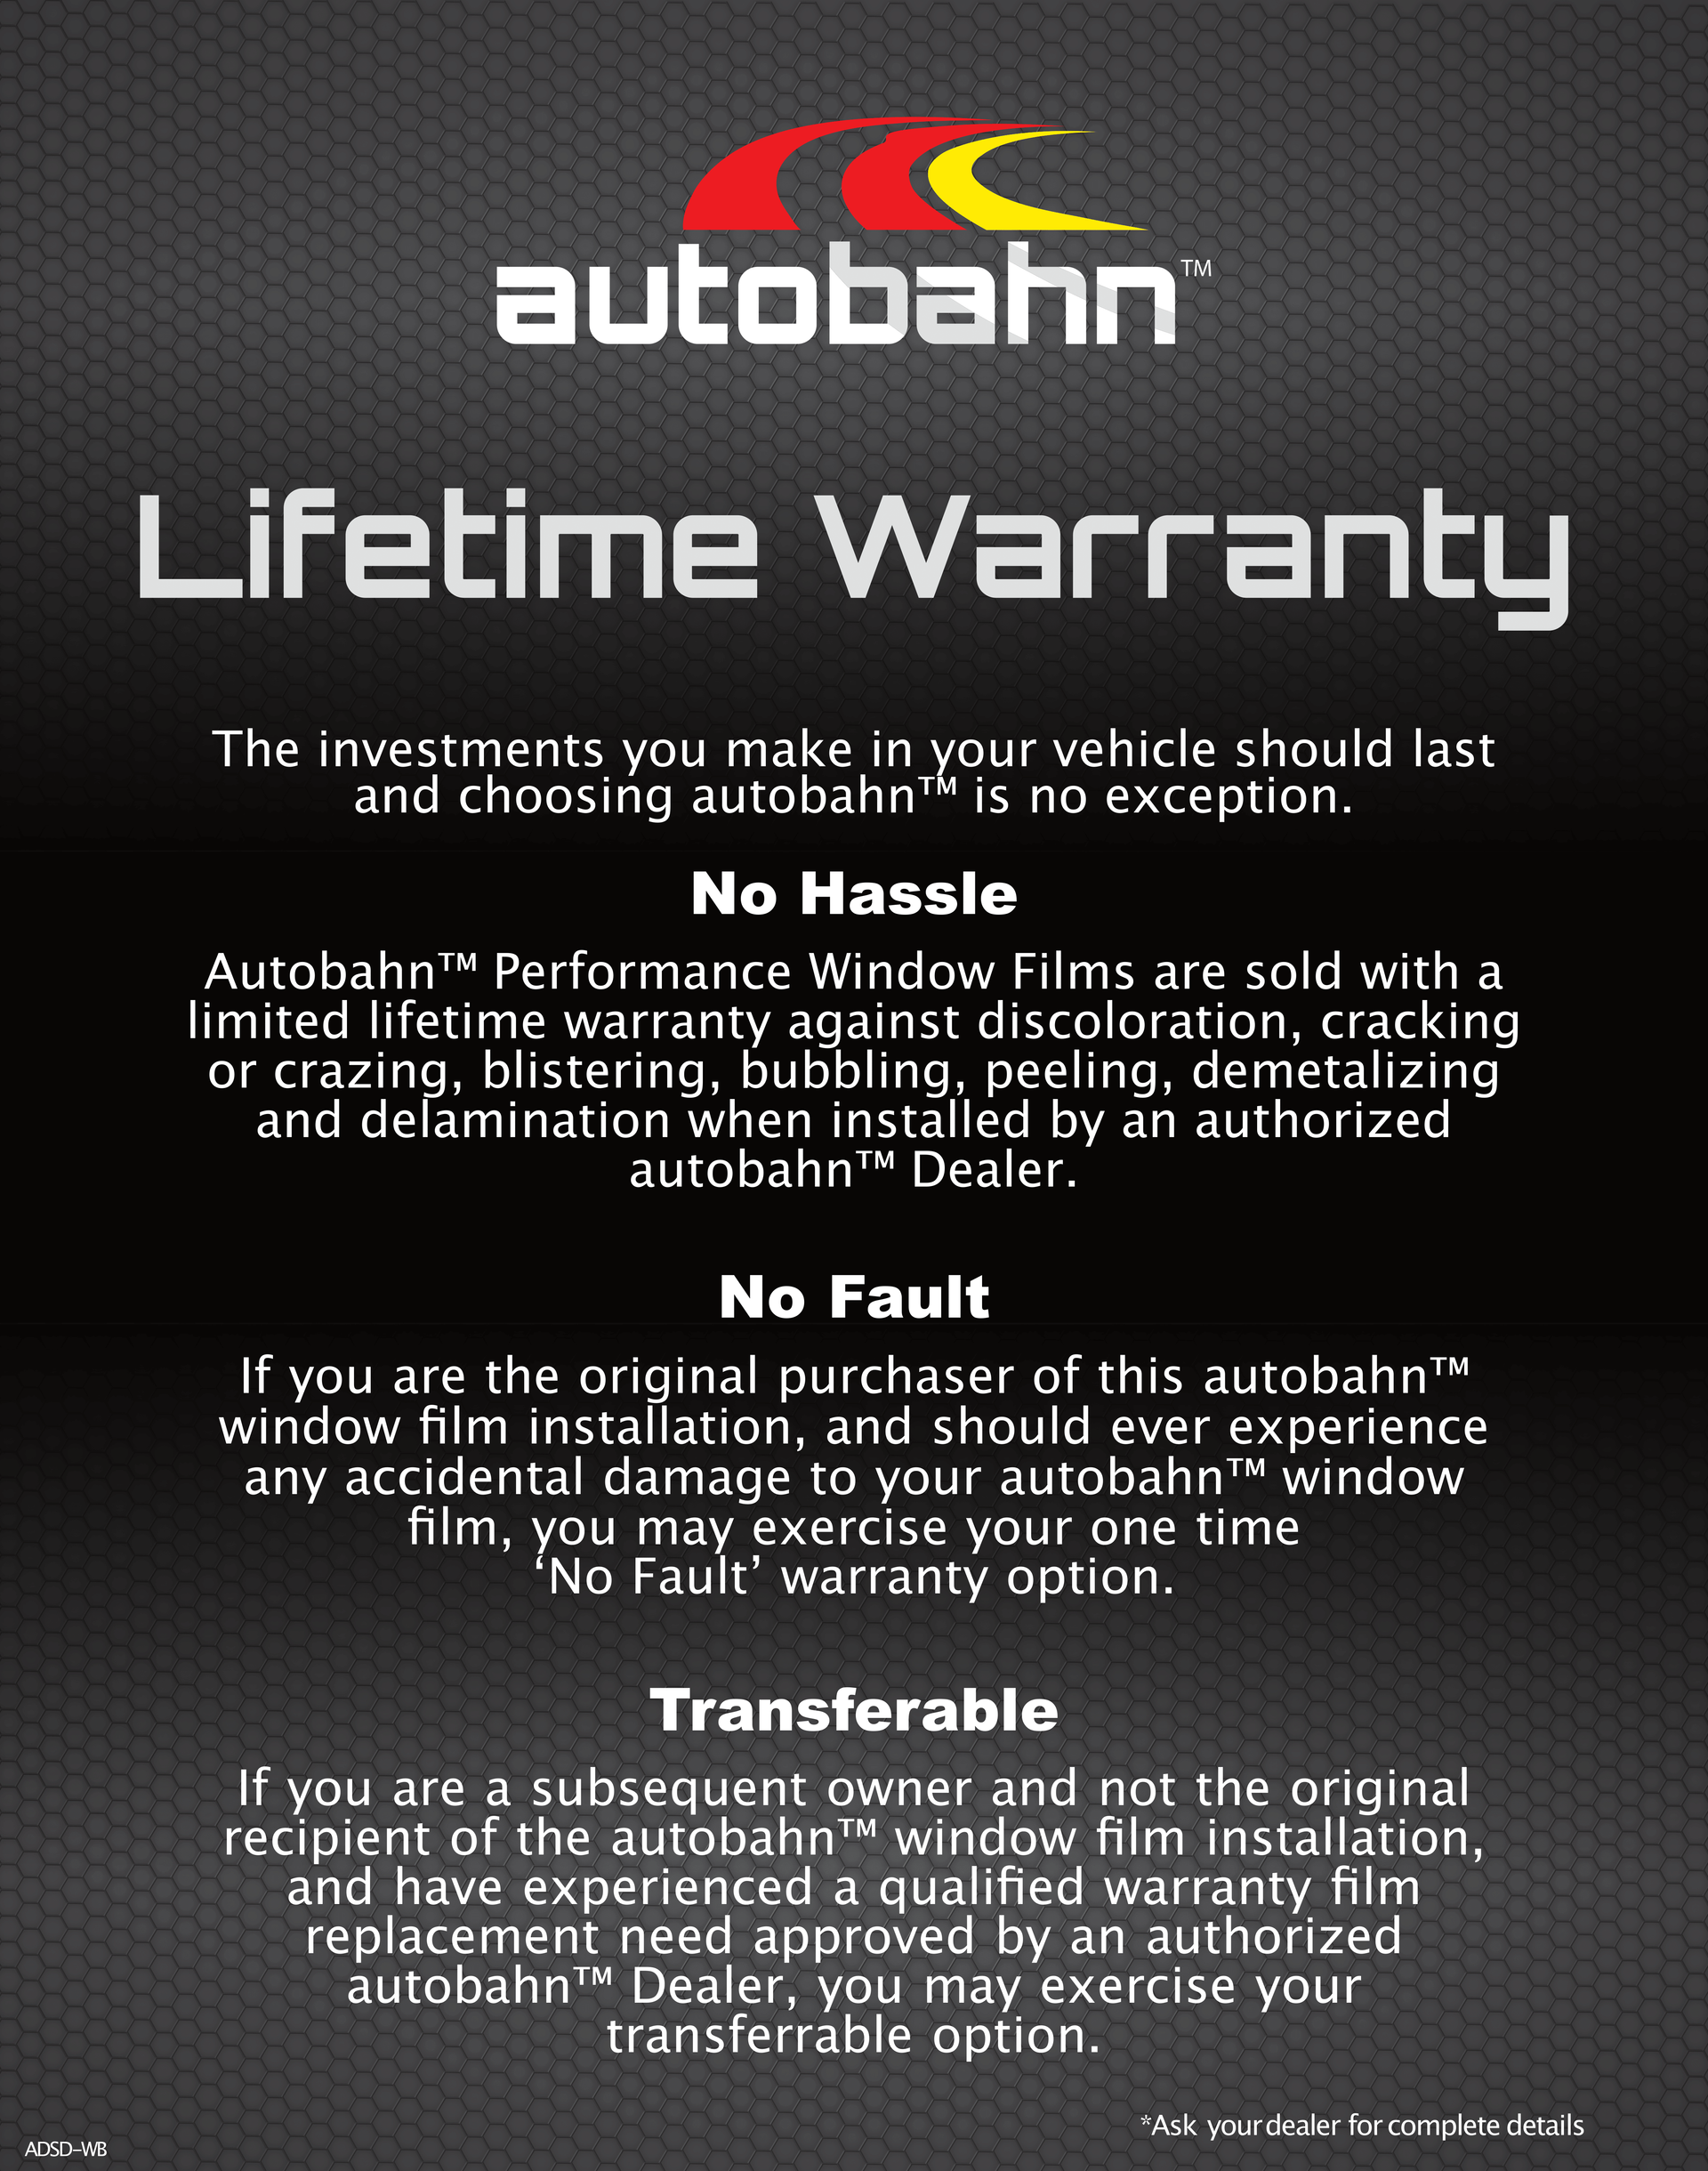 An autobahn lifetime warranty includes no hassle and no fault